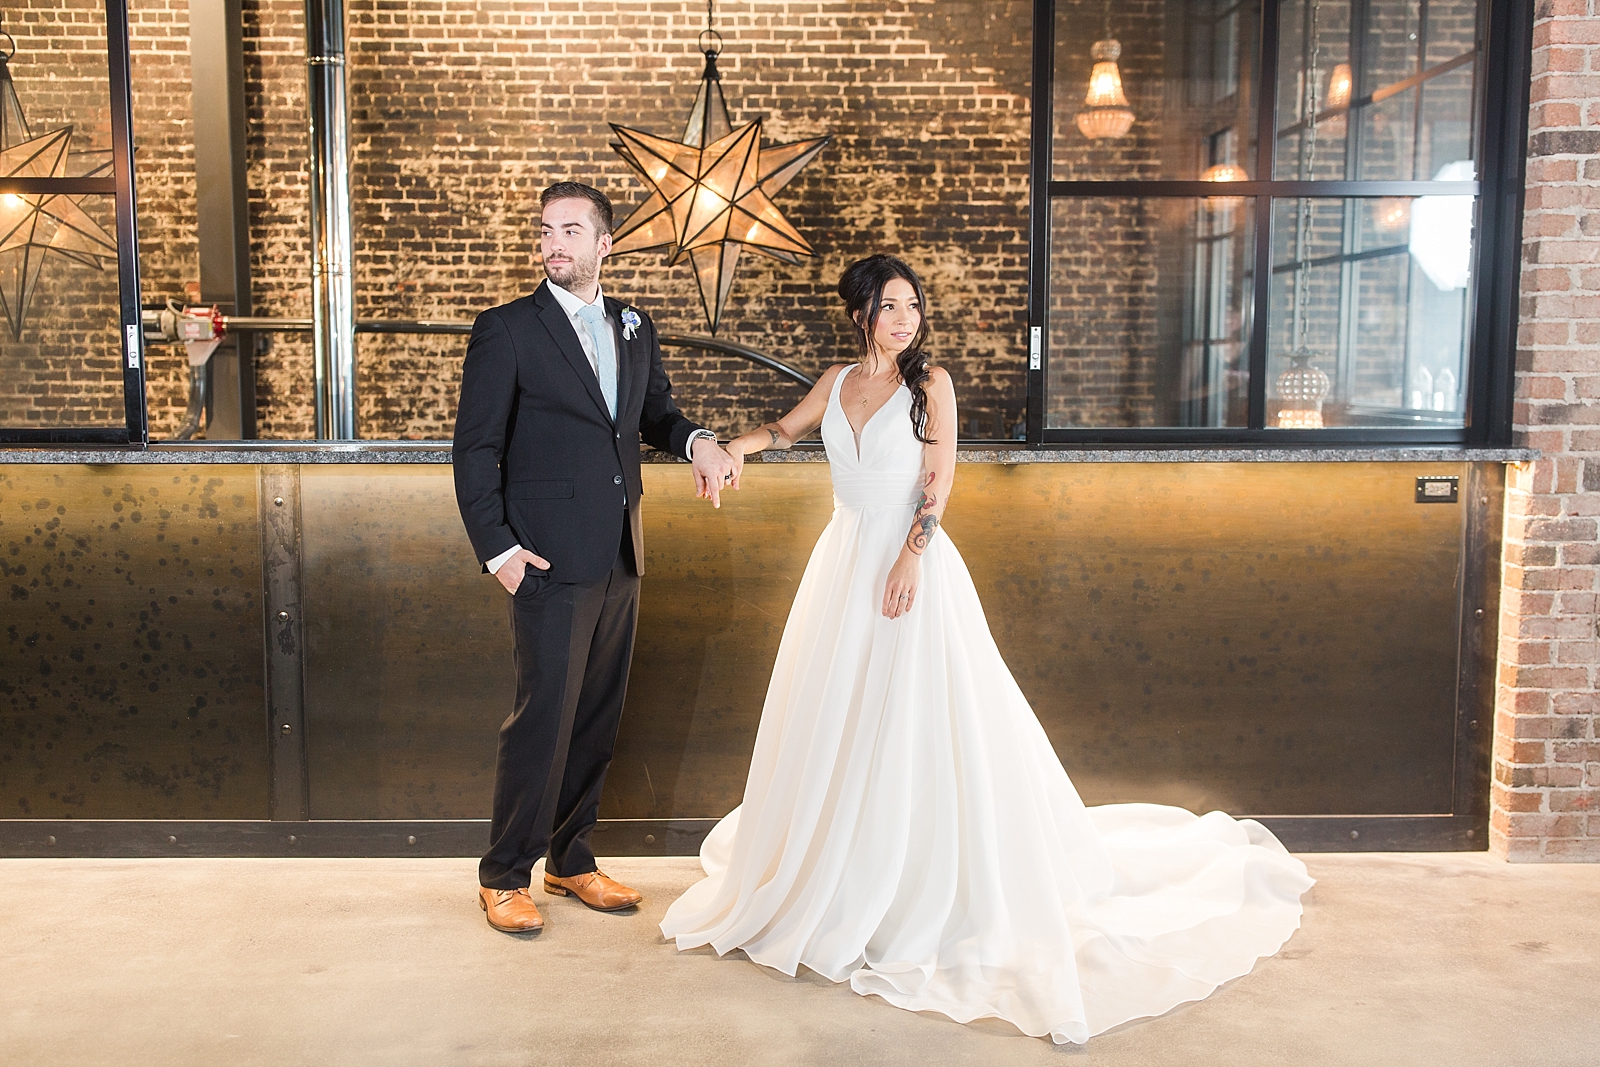 Glover Park Brewery Wedding Bride and Groom holding hands in venue in front of star light fixture Photo